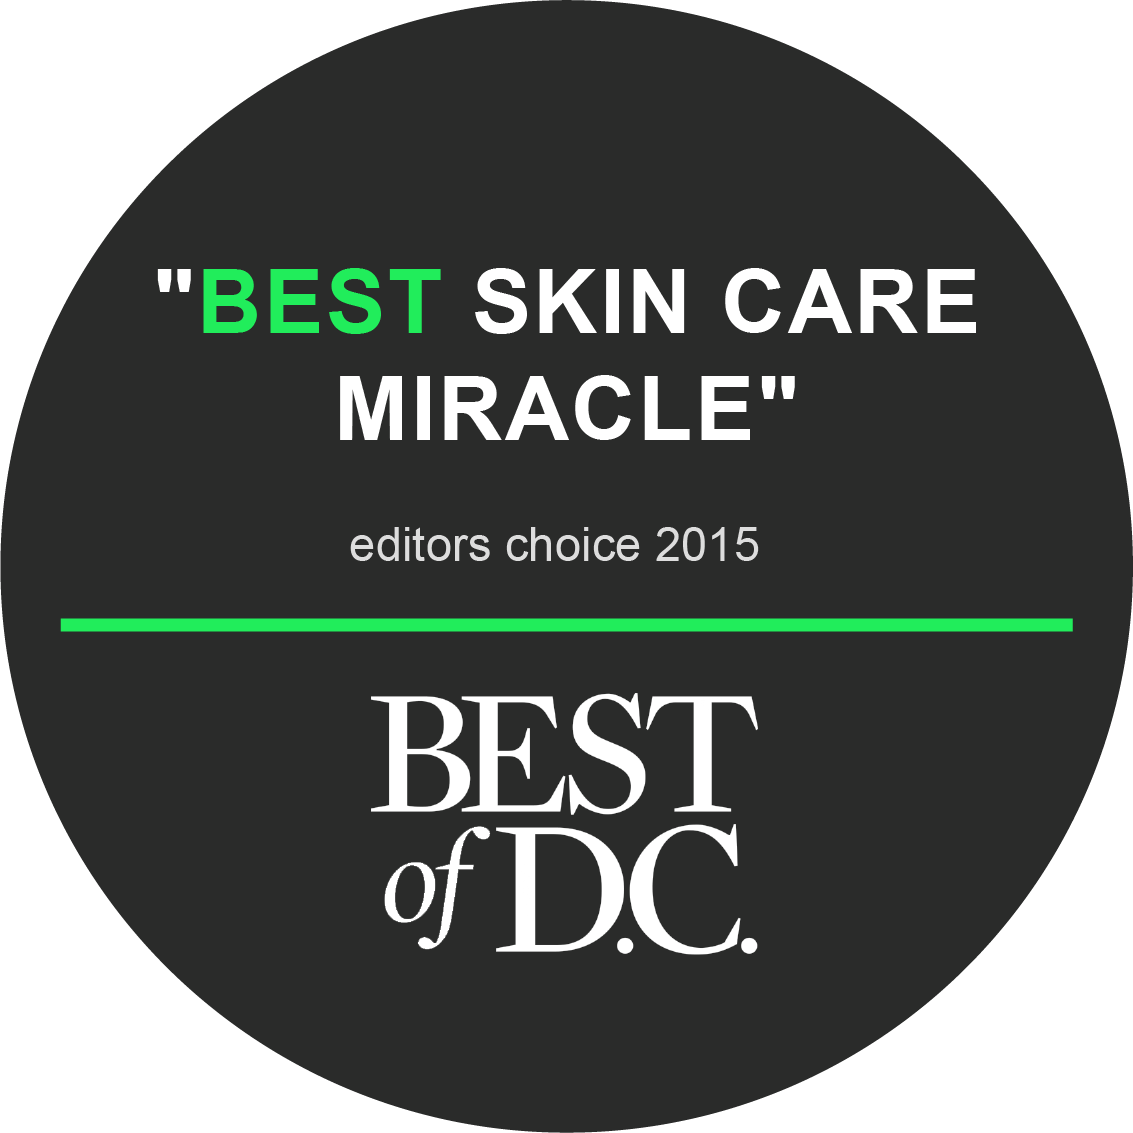 Best of D.C. - Best Skin Care Miracle, Editor's Choice 2015